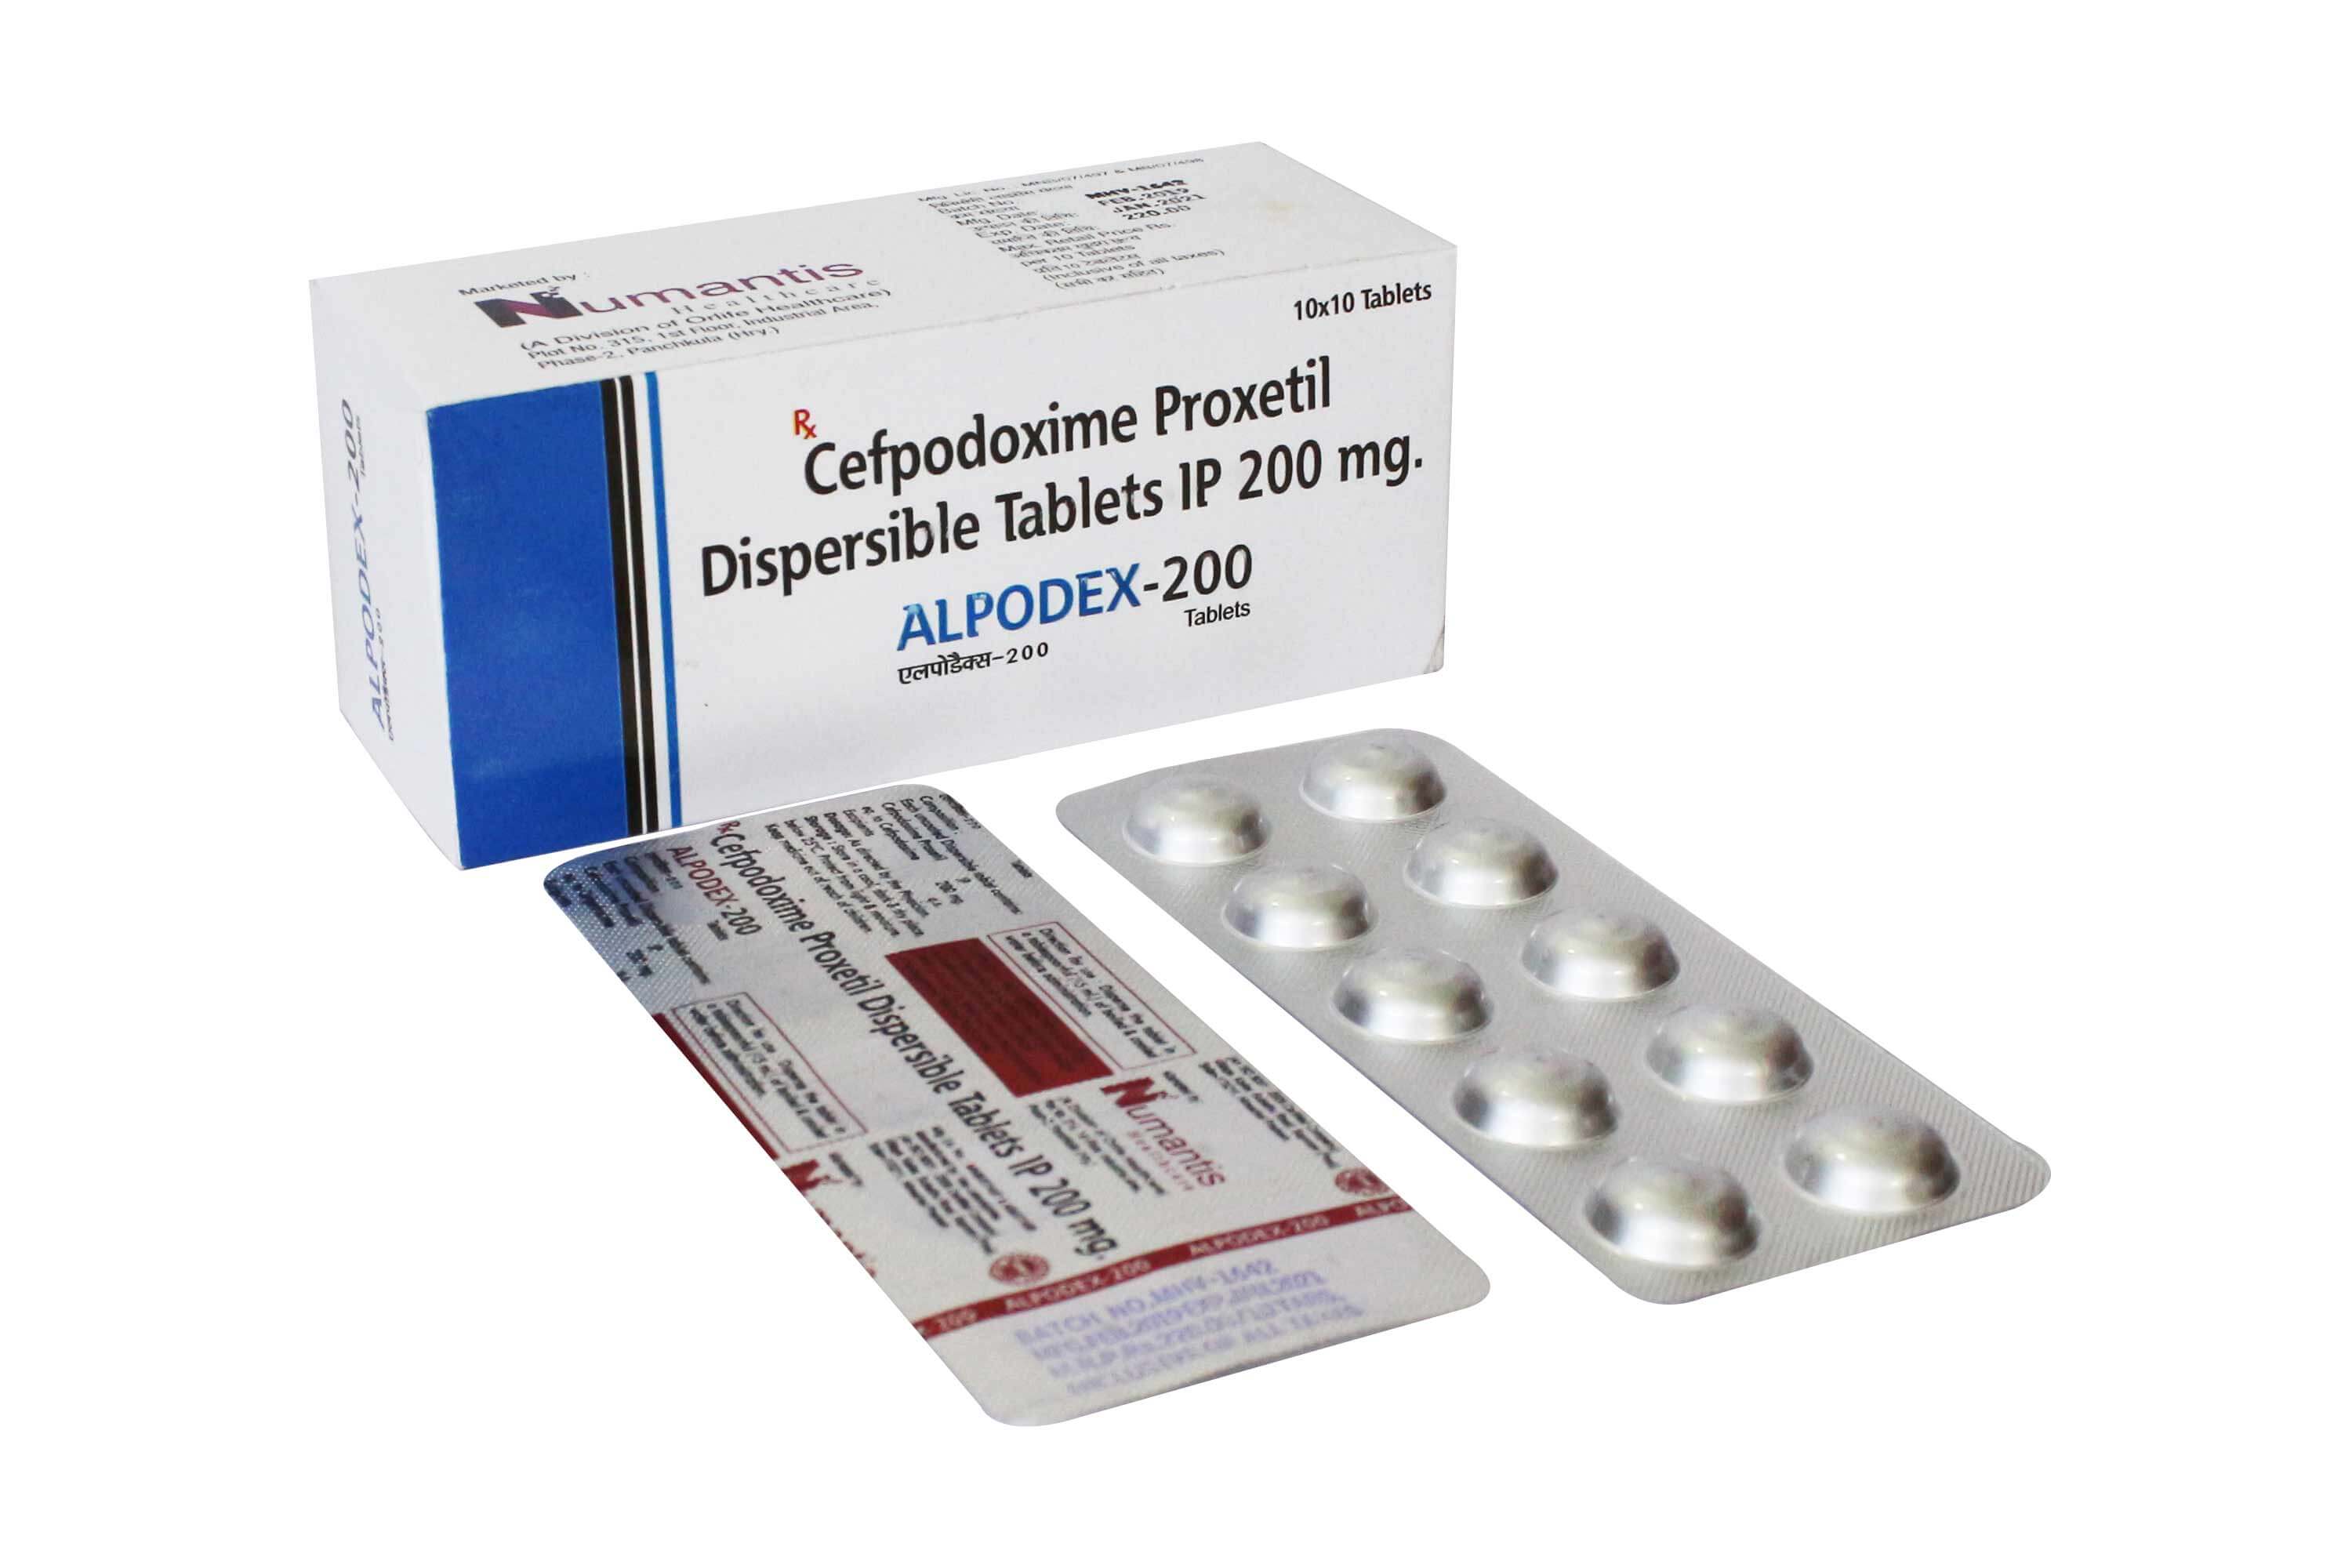 Product Name: Alpodex 200, Compositions of Alpodex 200 are Cefpodoxime Proxetil Dispersible Tablets IP 200mg - Numantis Healthcare